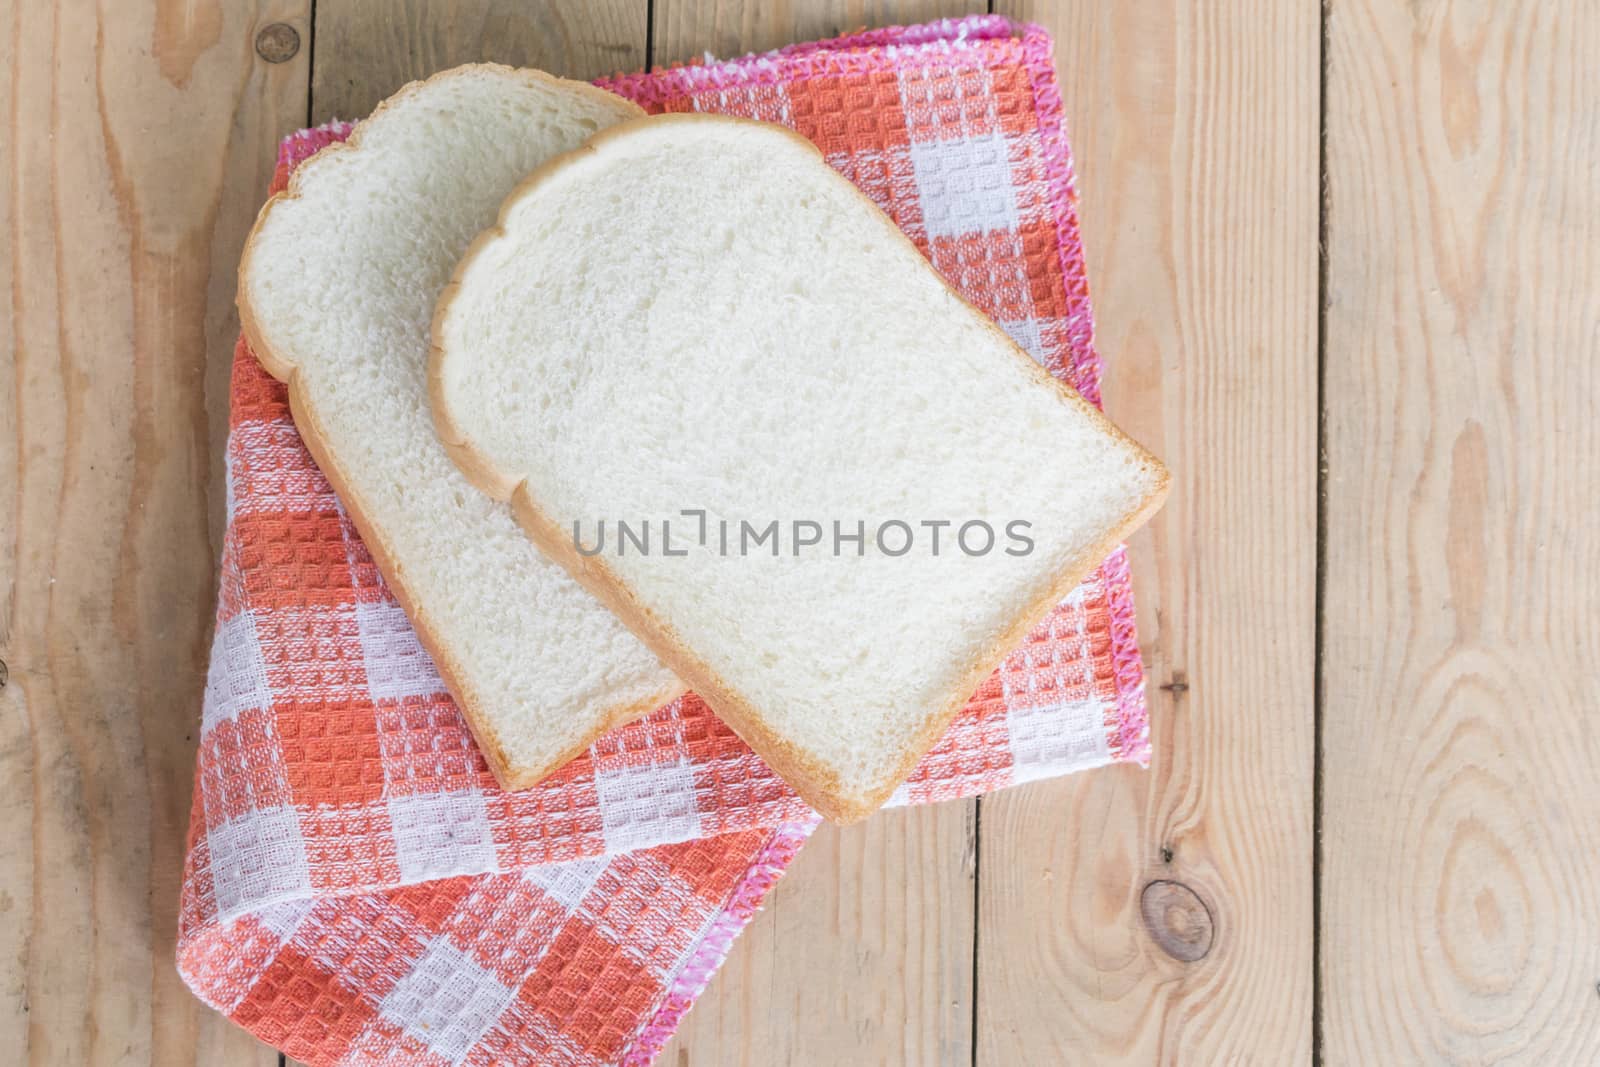 Two slice bread on napkin,food background